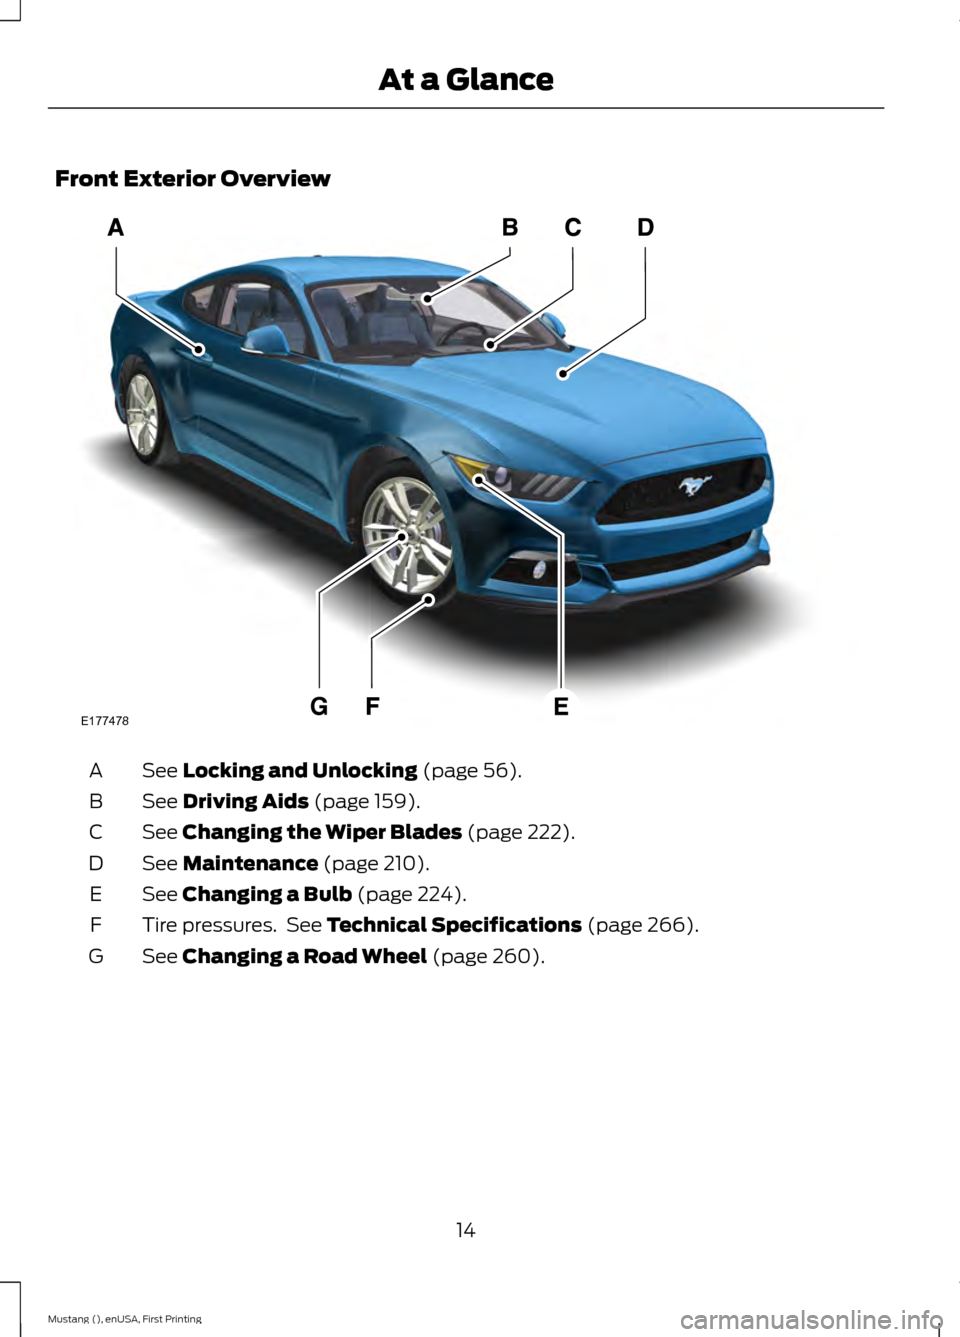 FORD MUSTANG 2015 6.G Owners Manual Front Exterior Overview
See Locking and Unlocking (page 56).
A
See 
Driving Aids (page 159).
B
See 
Changing the Wiper Blades (page 222).
C
See 
Maintenance (page 210).
D
See 
Changing a Bulb (page 22